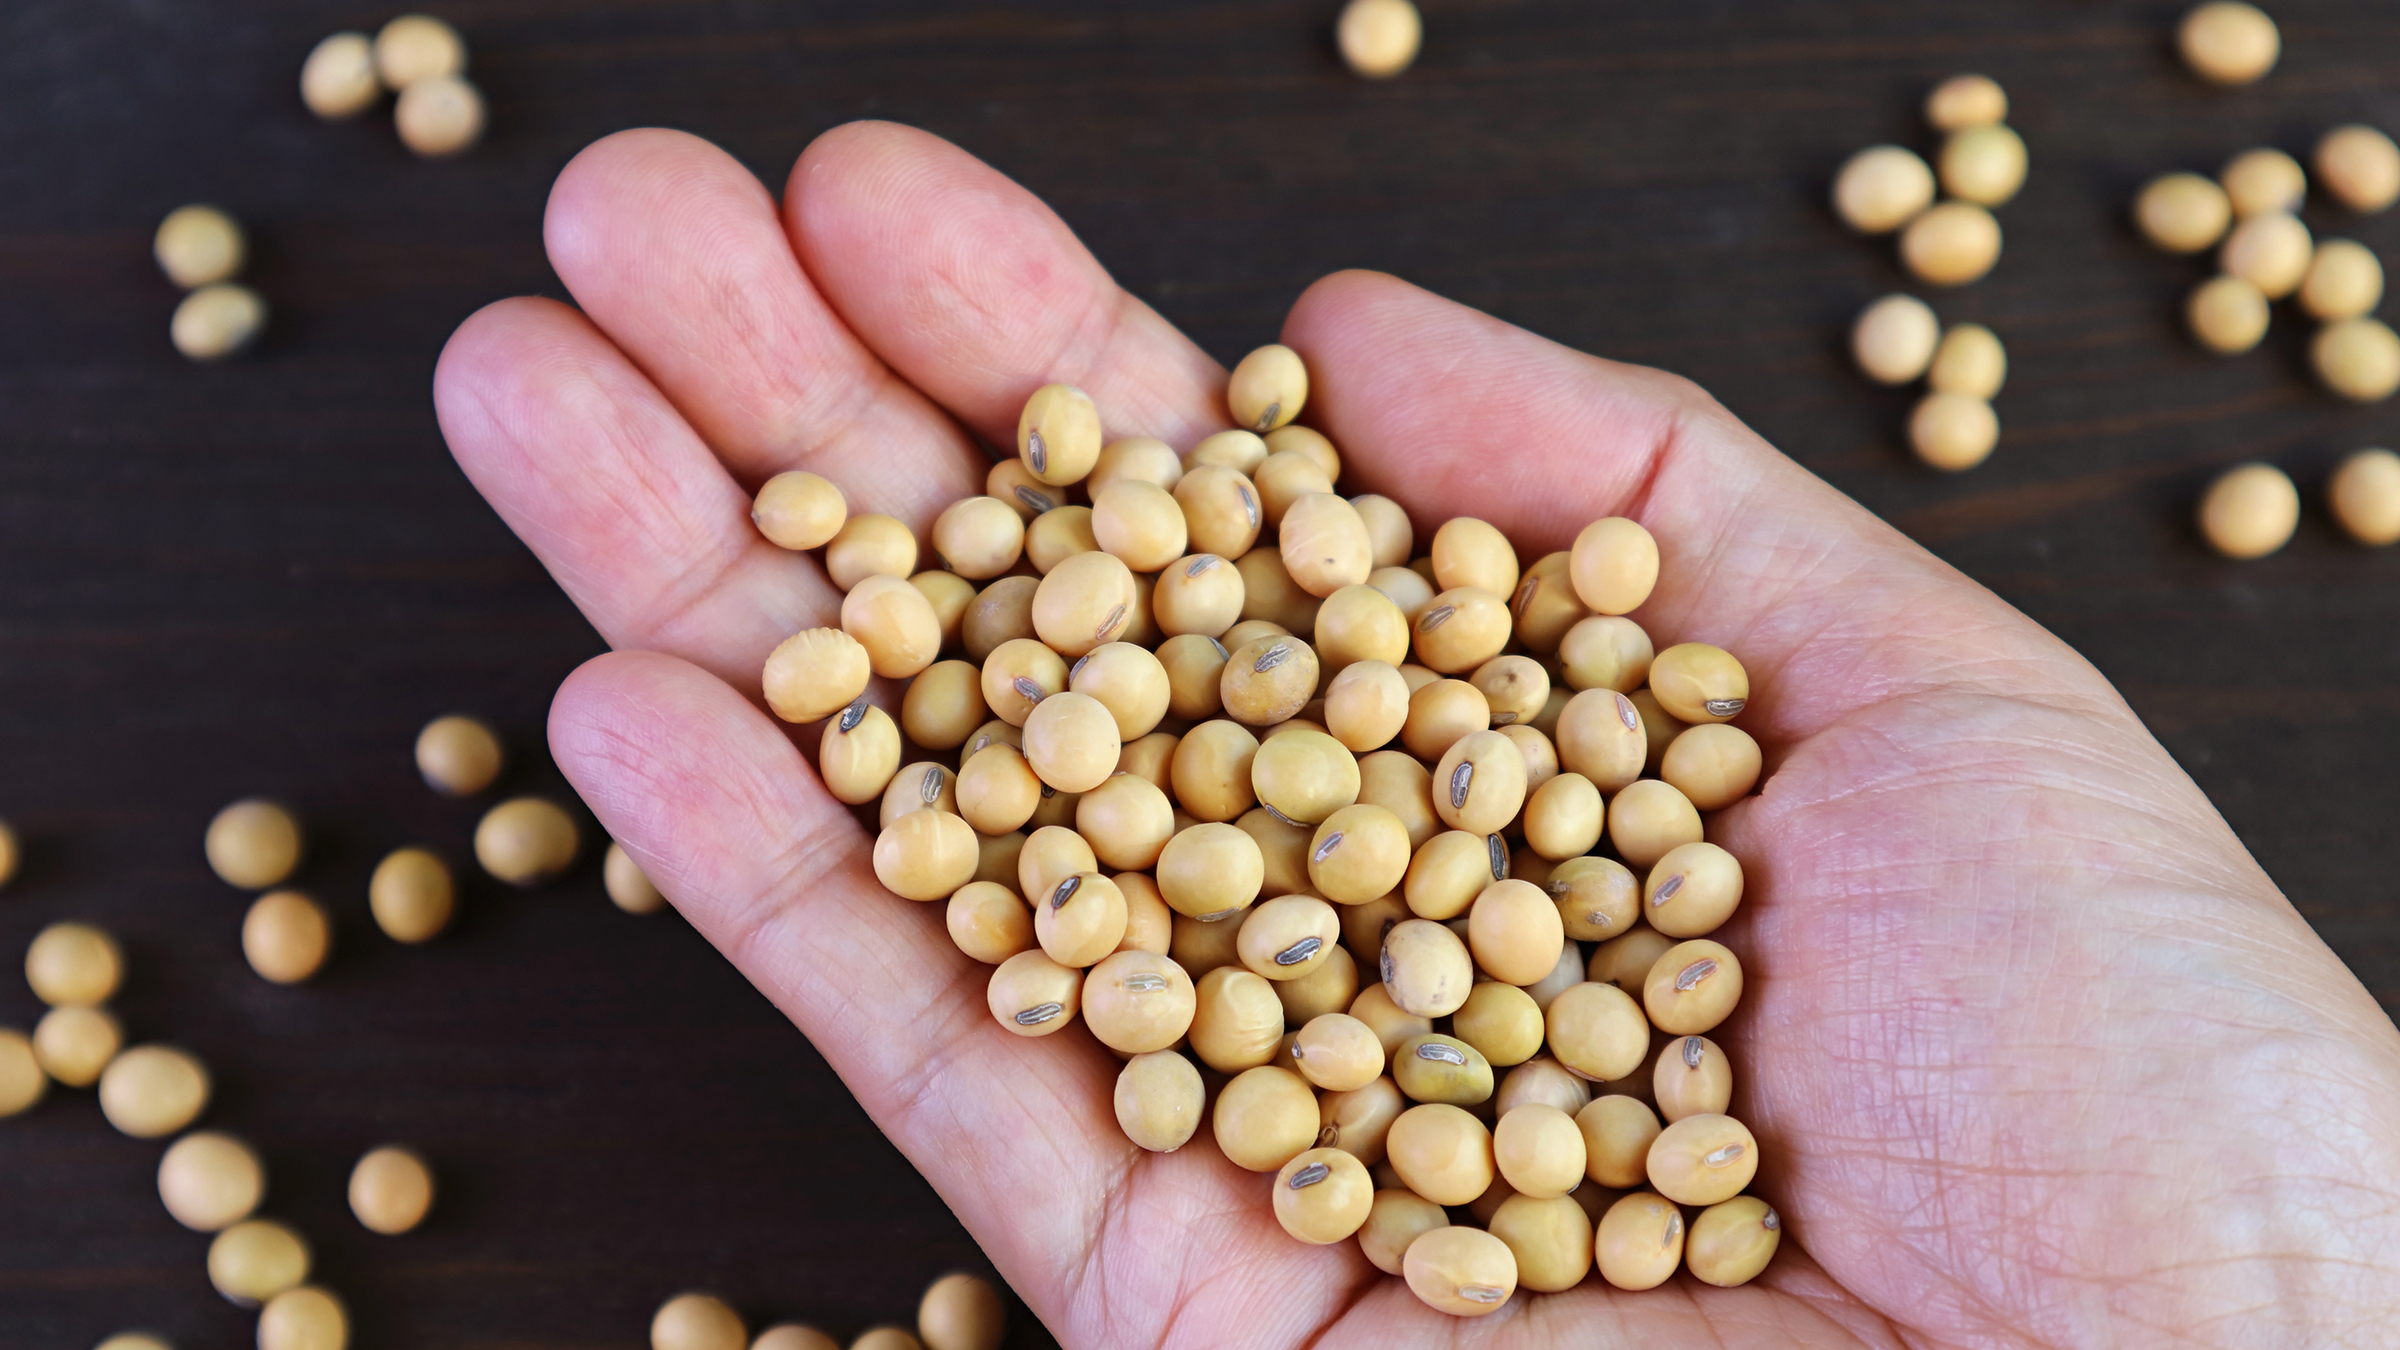 Is Soy Bad for You? Here's What the Research Says - GoodRx